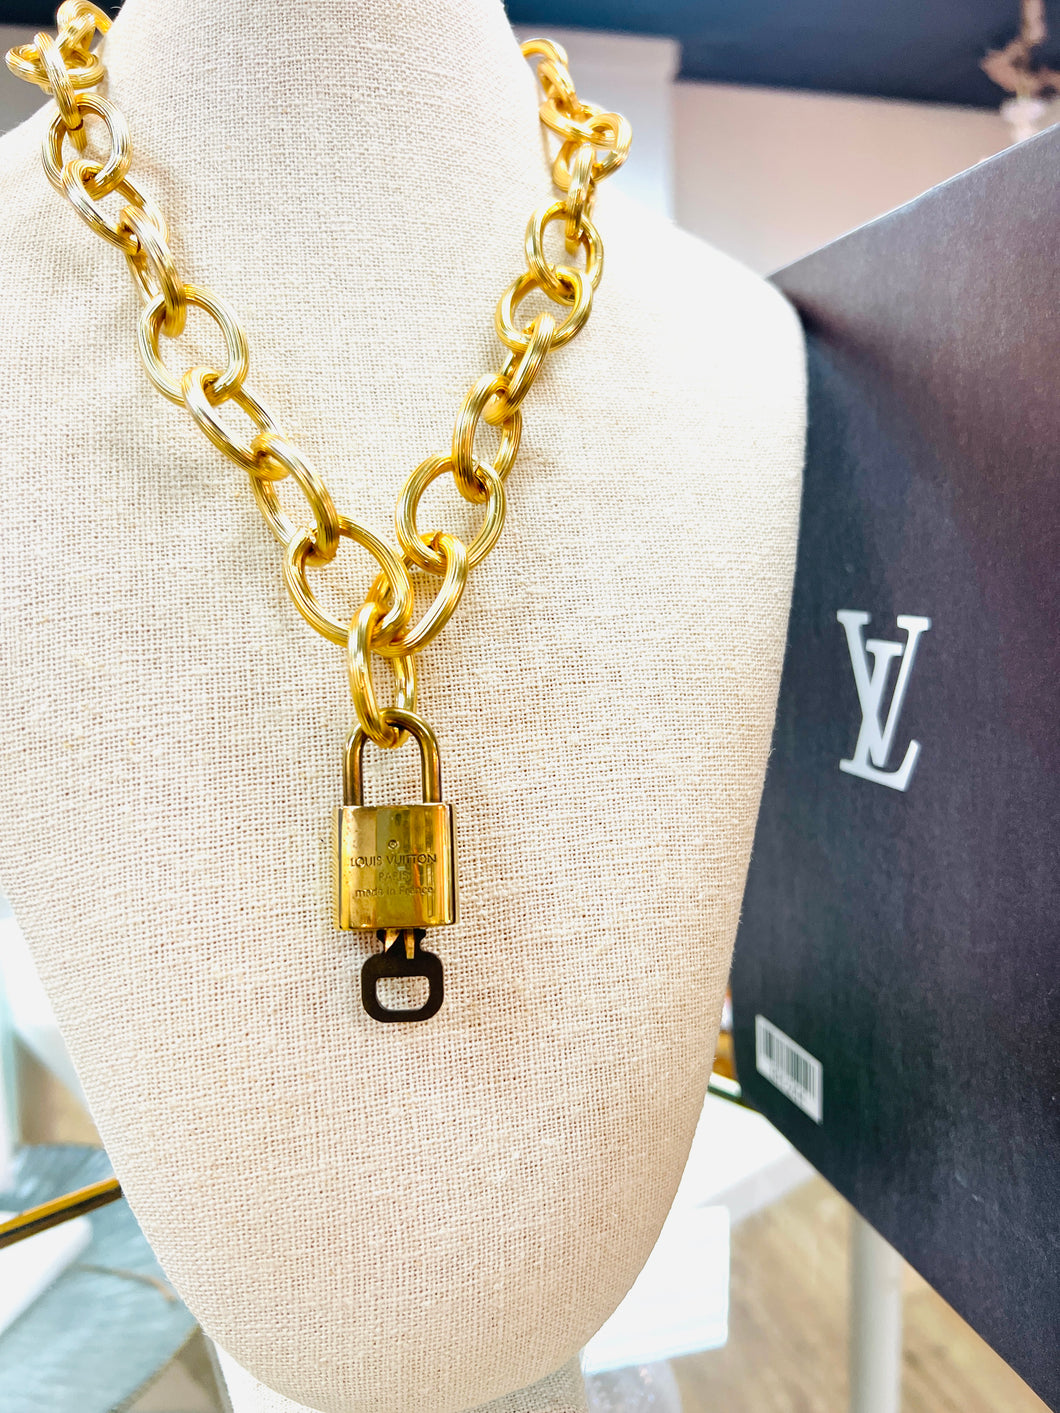 Designer Chain Necklace with Authentic Louis Vuitton Lock Attached